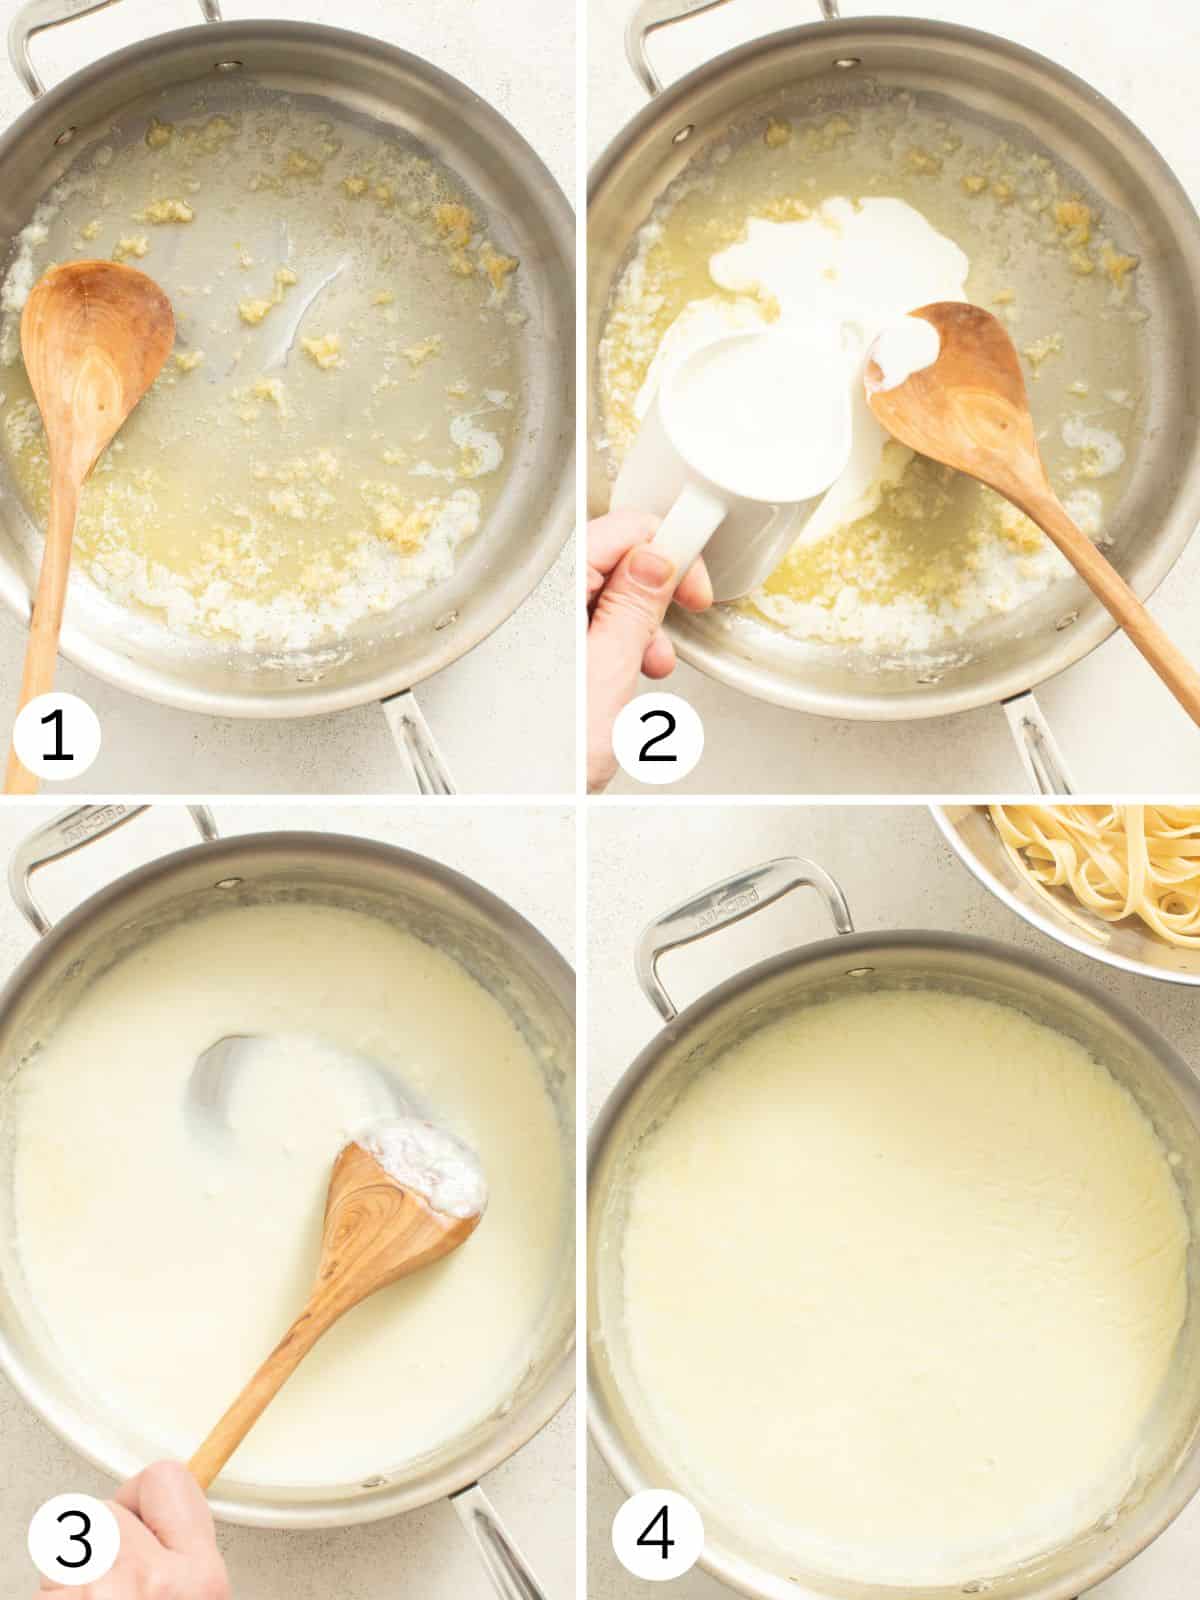 Step by step process of making a mozzarella alfredo sauce with butter and cream.